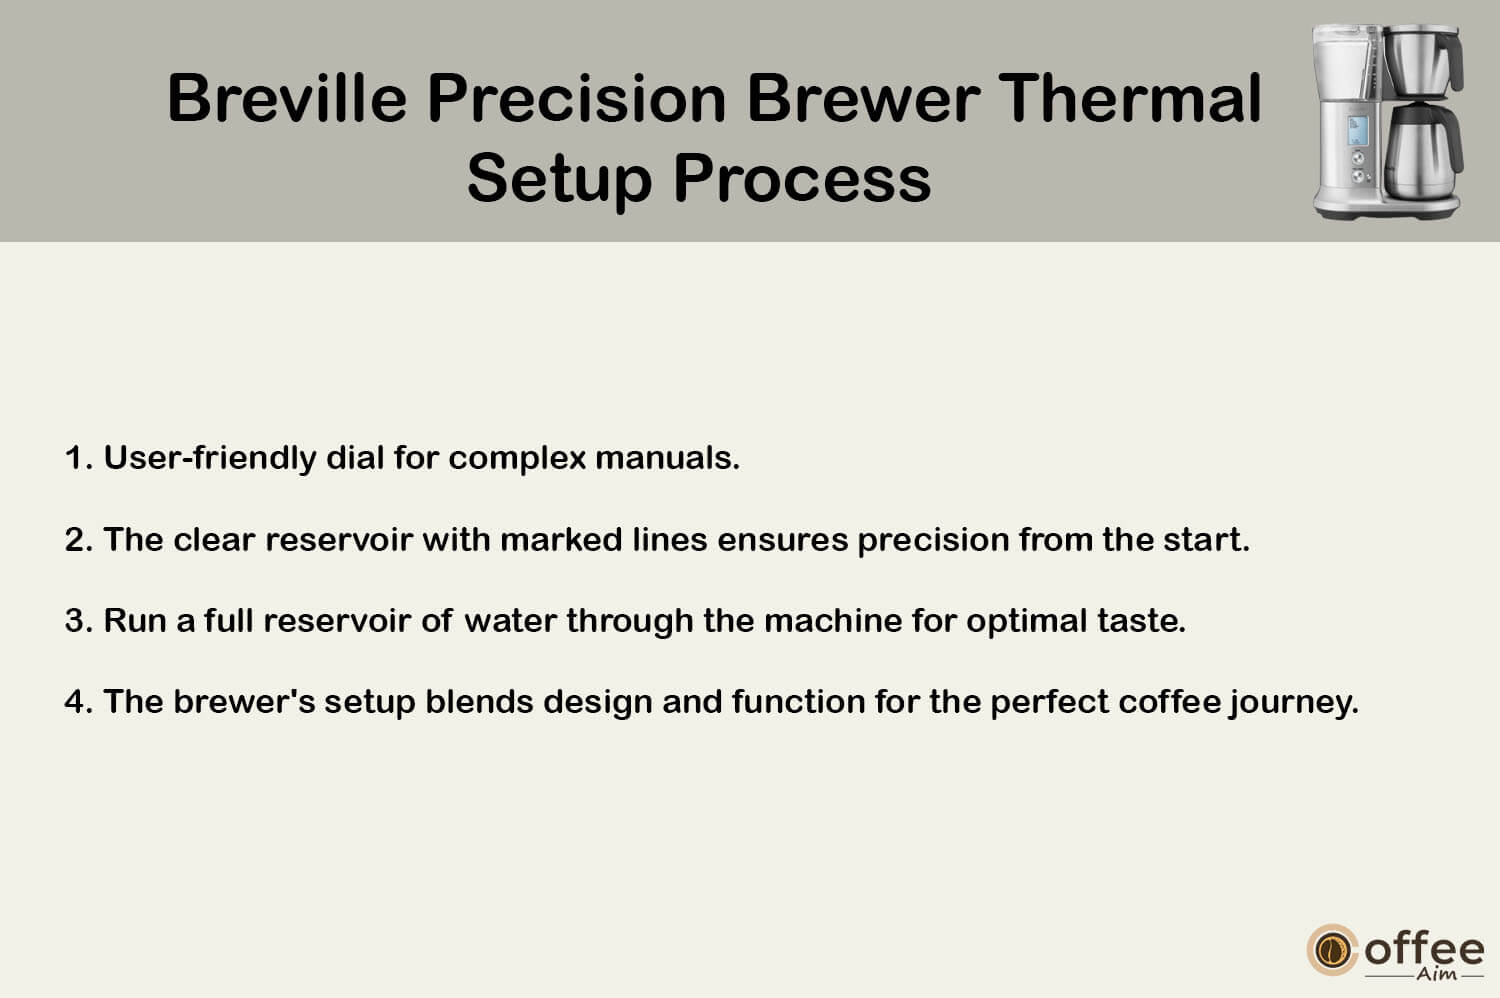 "This image illustrates the setup procedure for the 'Breville Precision Brewer Thermal' as featured in our 'Breville Precision Brewer Thermal Review' article."